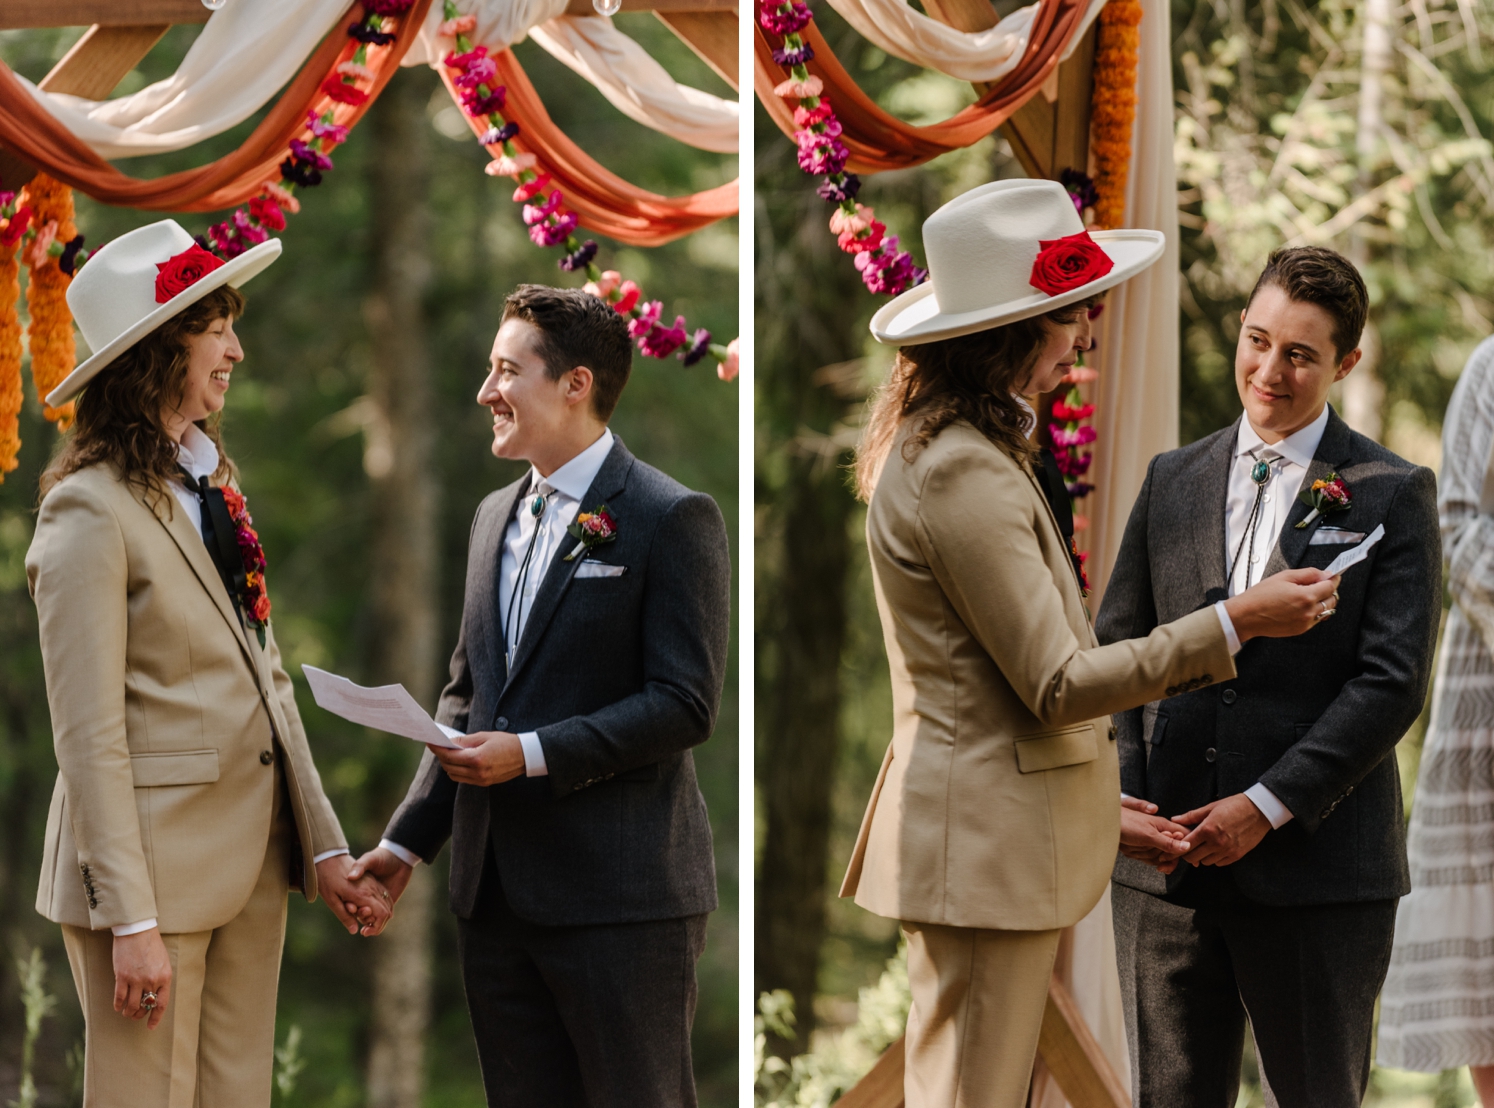 Couple exchanging vows during LGBTQ wedding ceremony | McArthur Weddings and Events